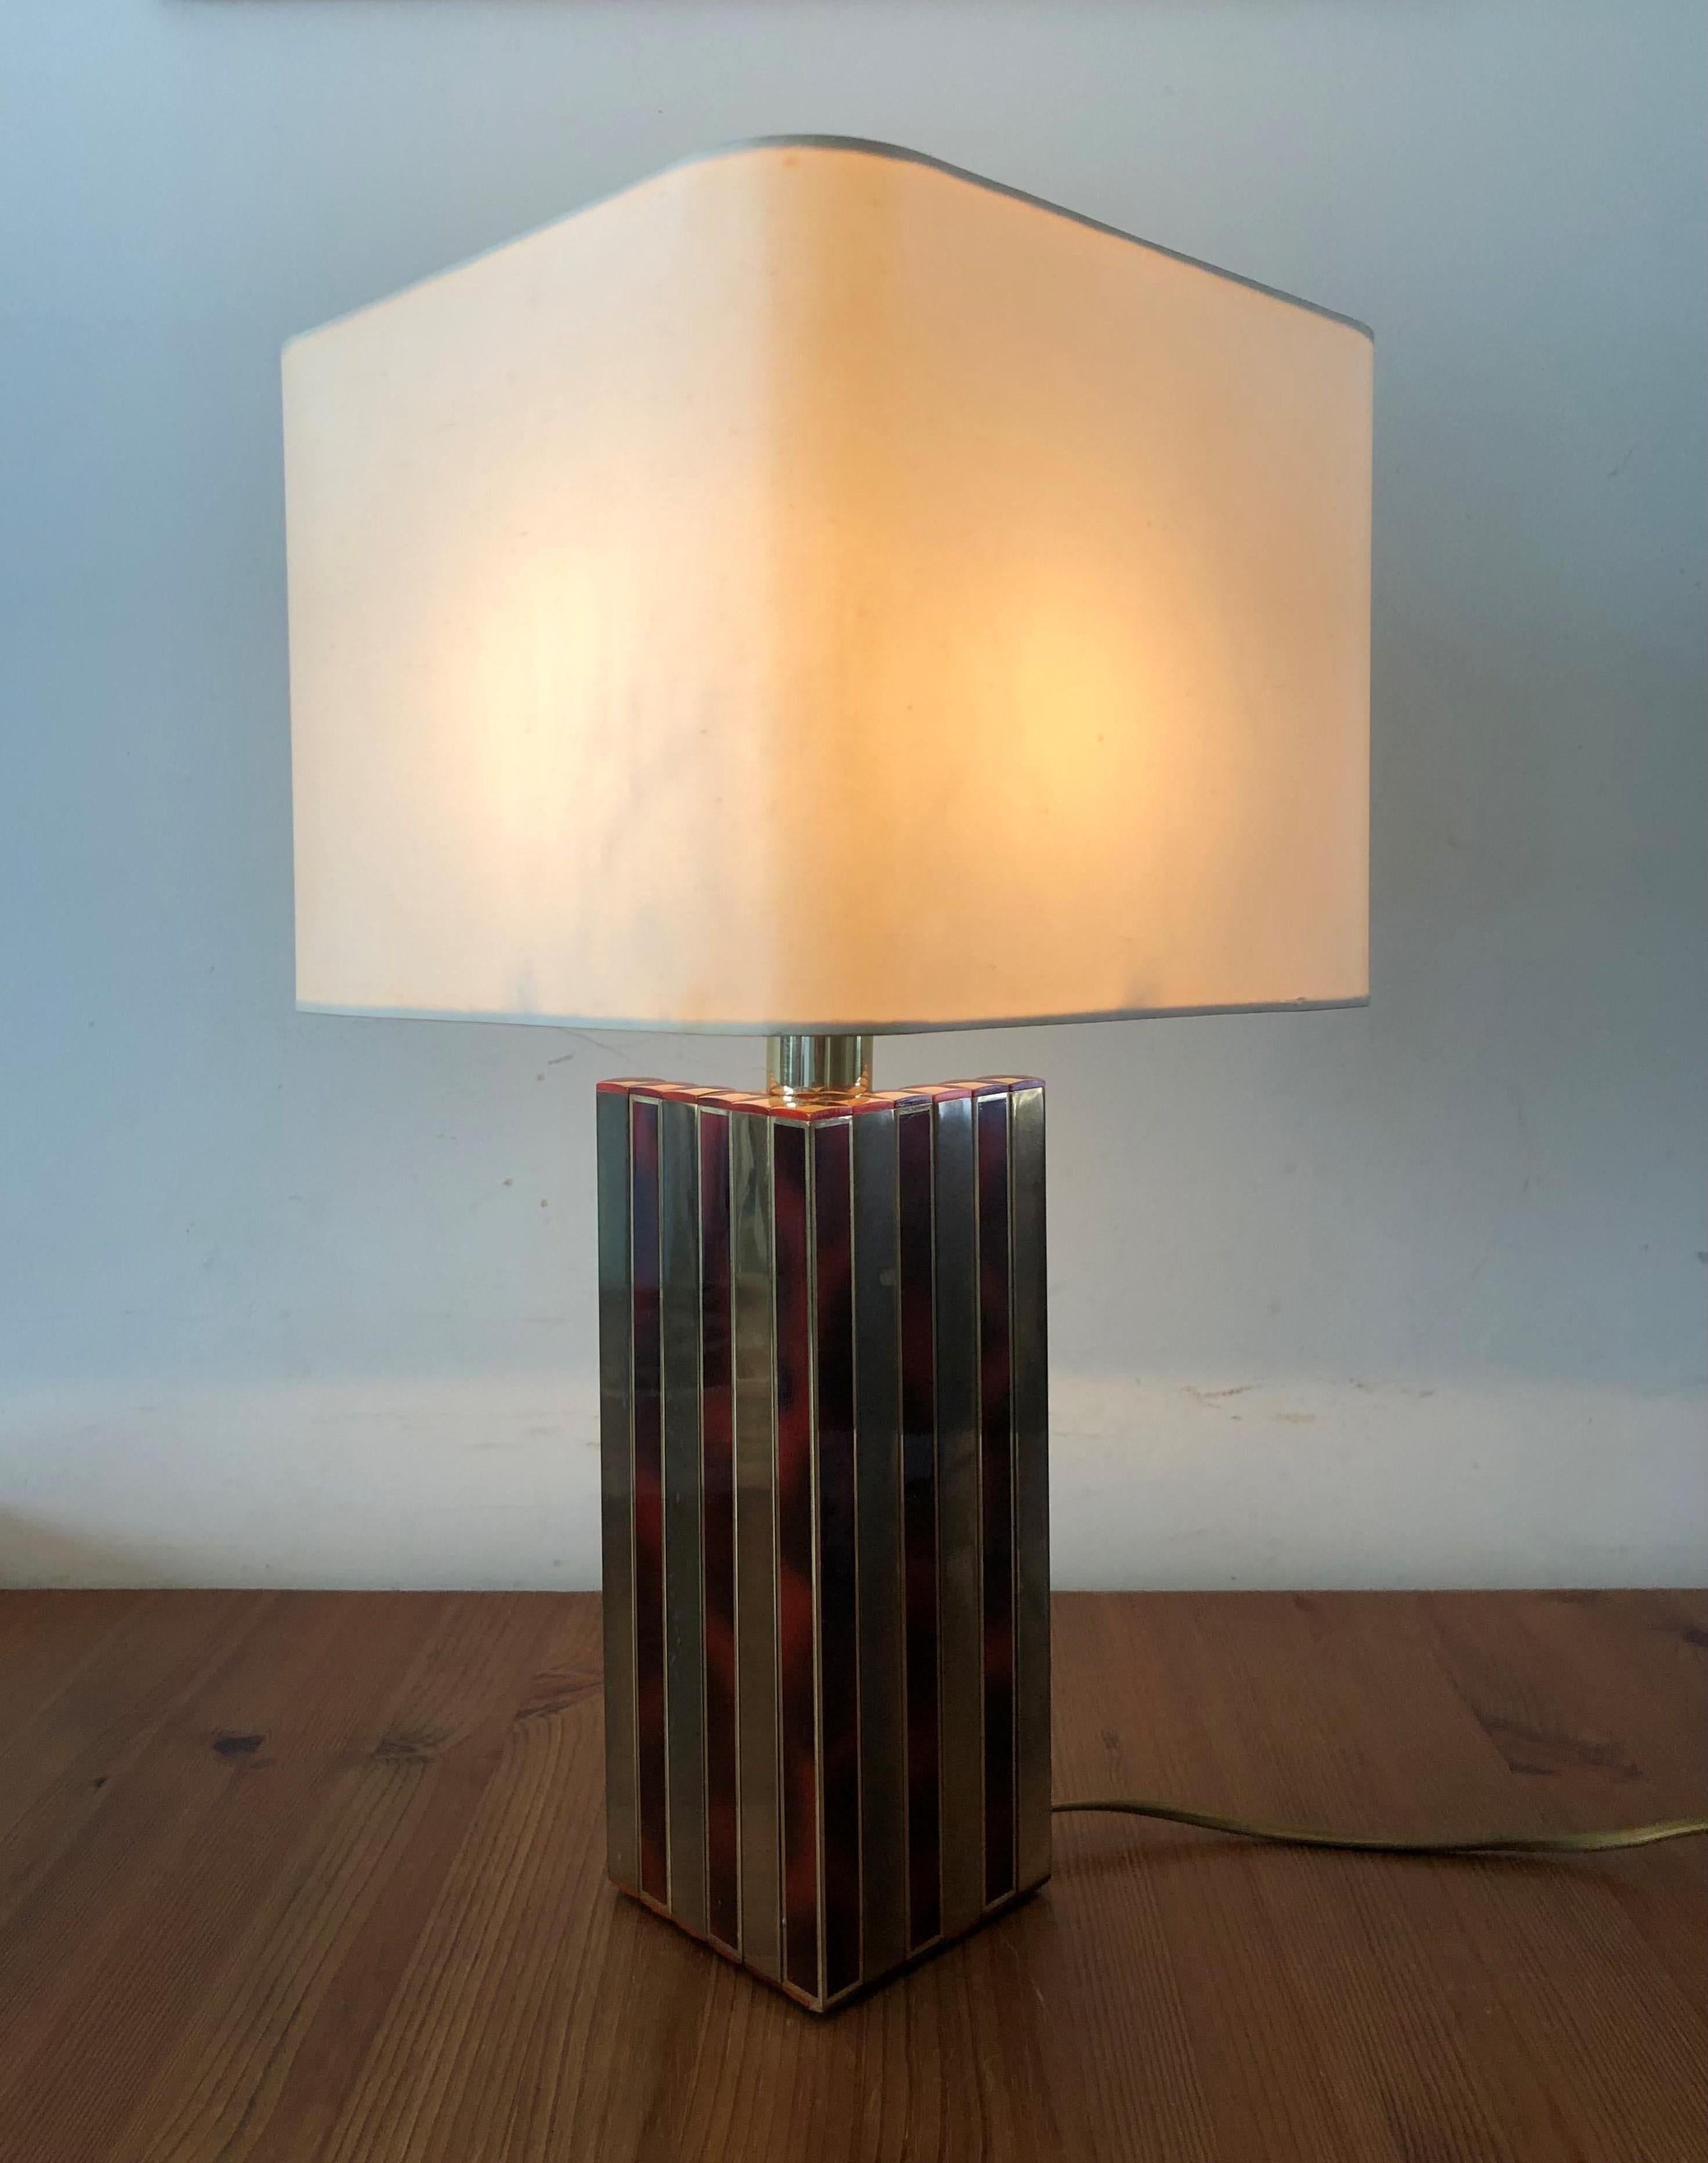 Midcentury Golden Brass and Tortoiseshell Enamel Table Lamp by BD Lumica, 1970s For Sale 1